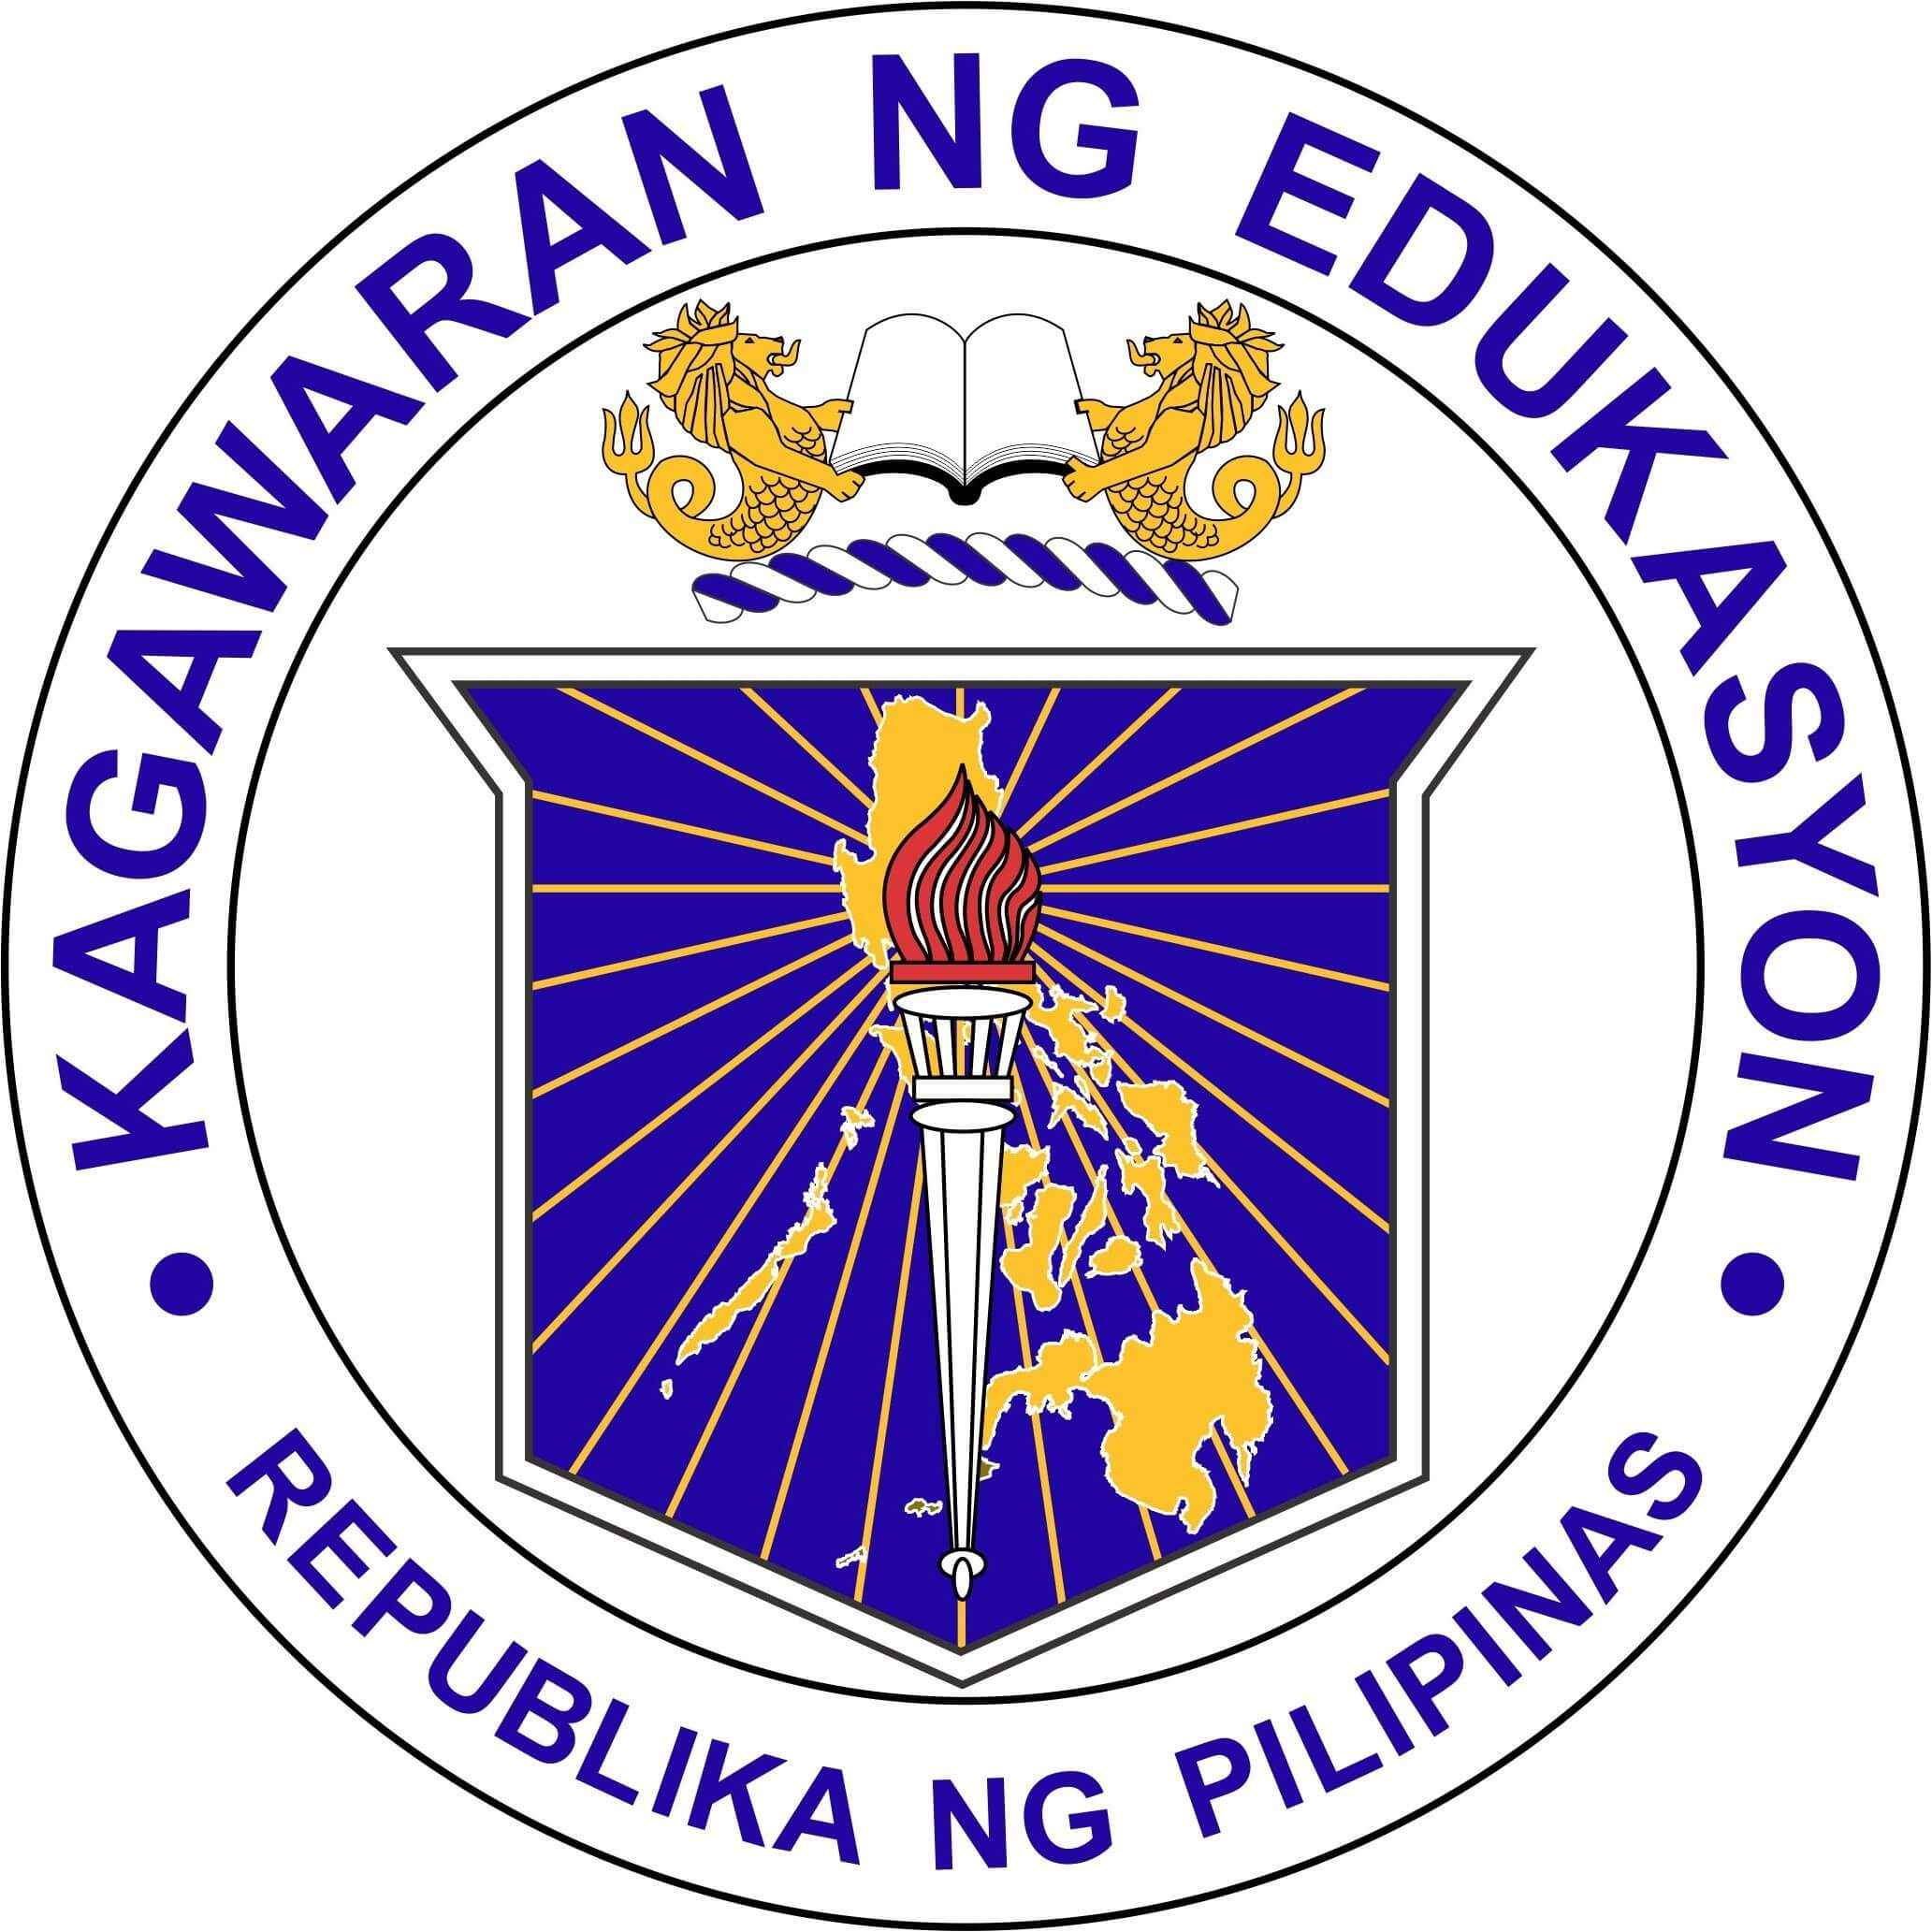 deped logo department of education philippines deped gov ph free vector download education philippines deped gov ph